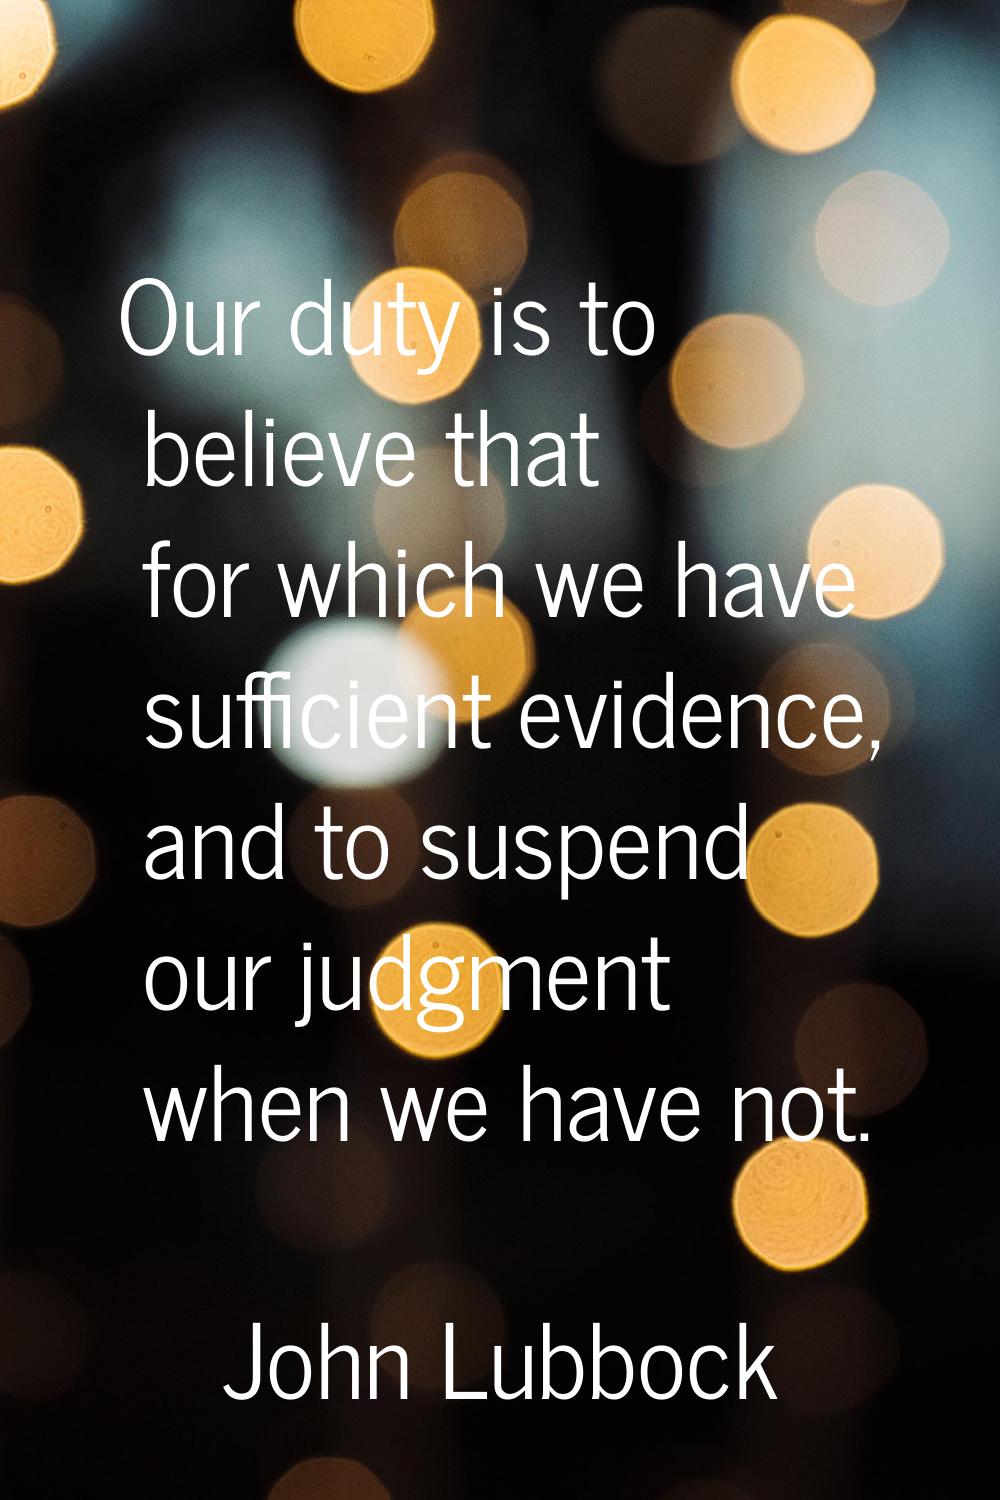 Our duty is to believe that for which we have sufficient evidence, and to suspend our judgment when